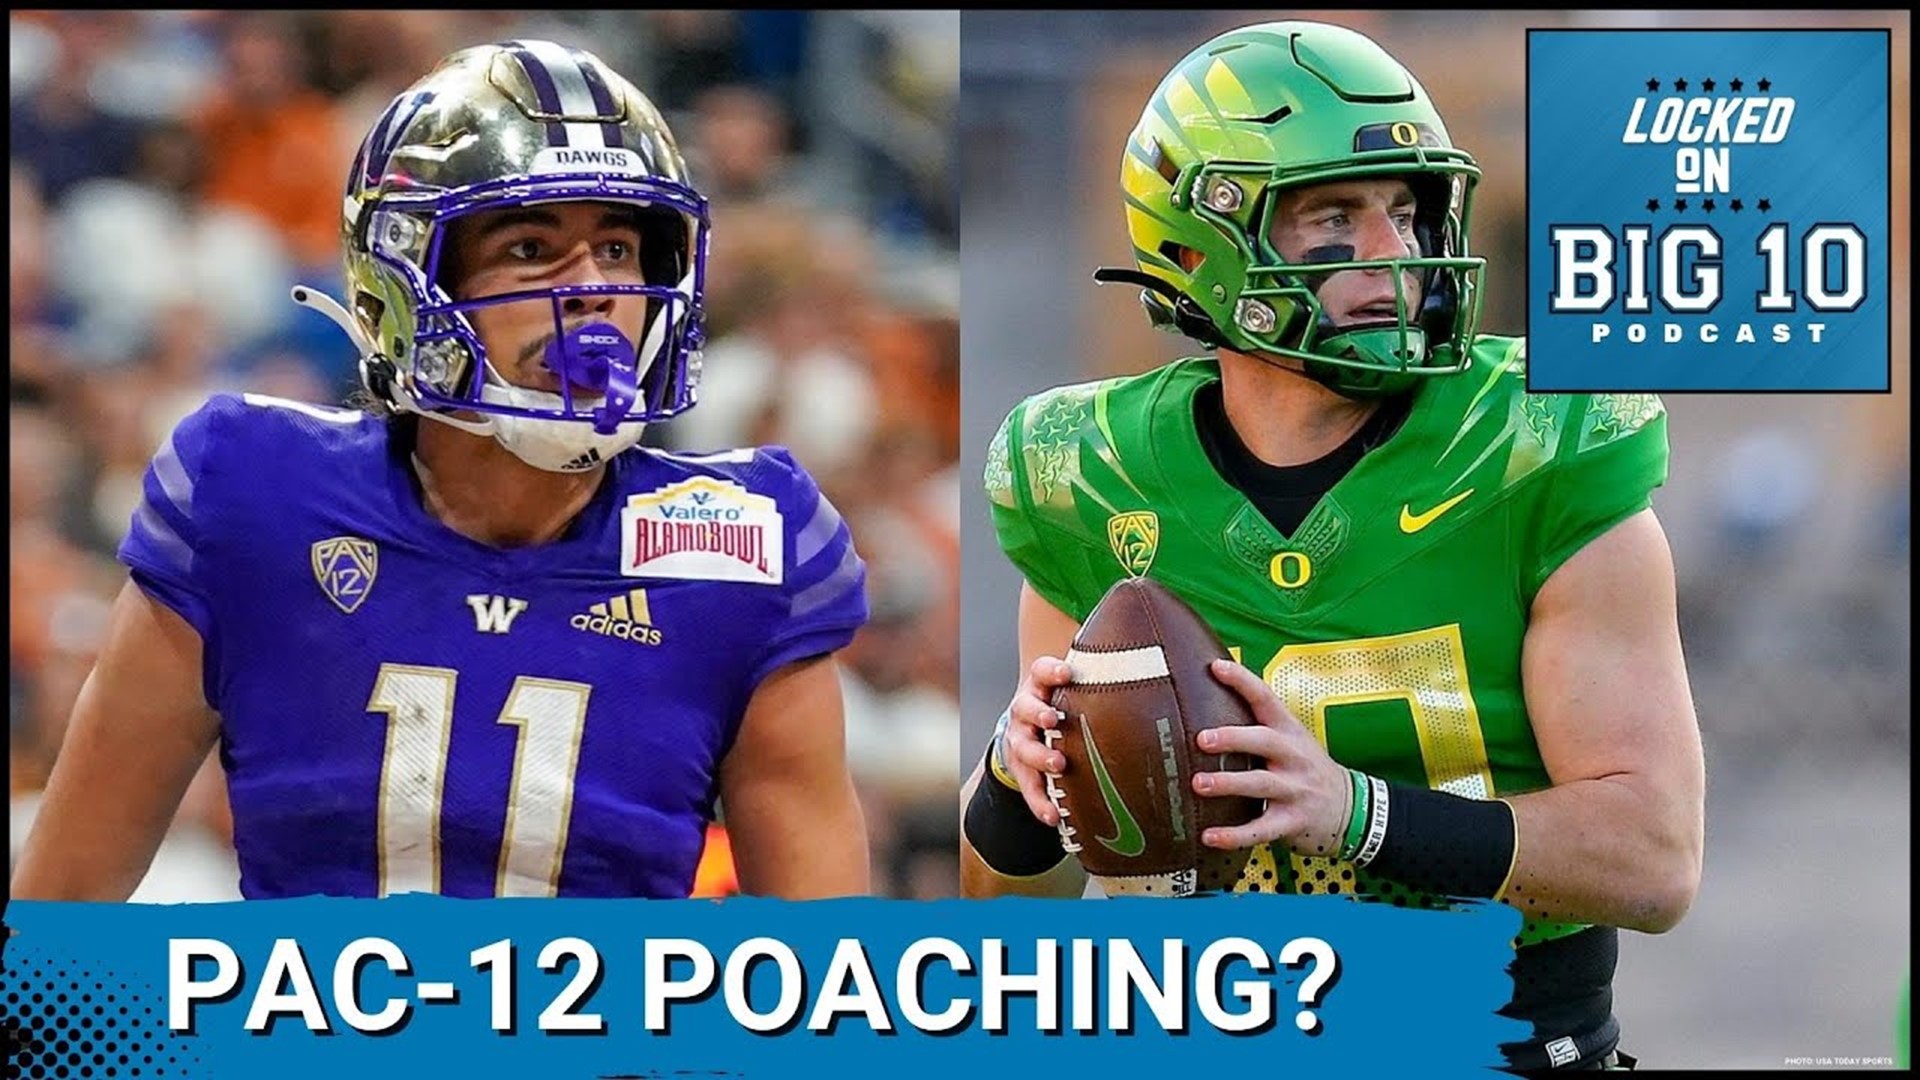 Reports Say the Big Ten Could Be Hunting Up to Four More Pac-12 Schools -- But Why Now?